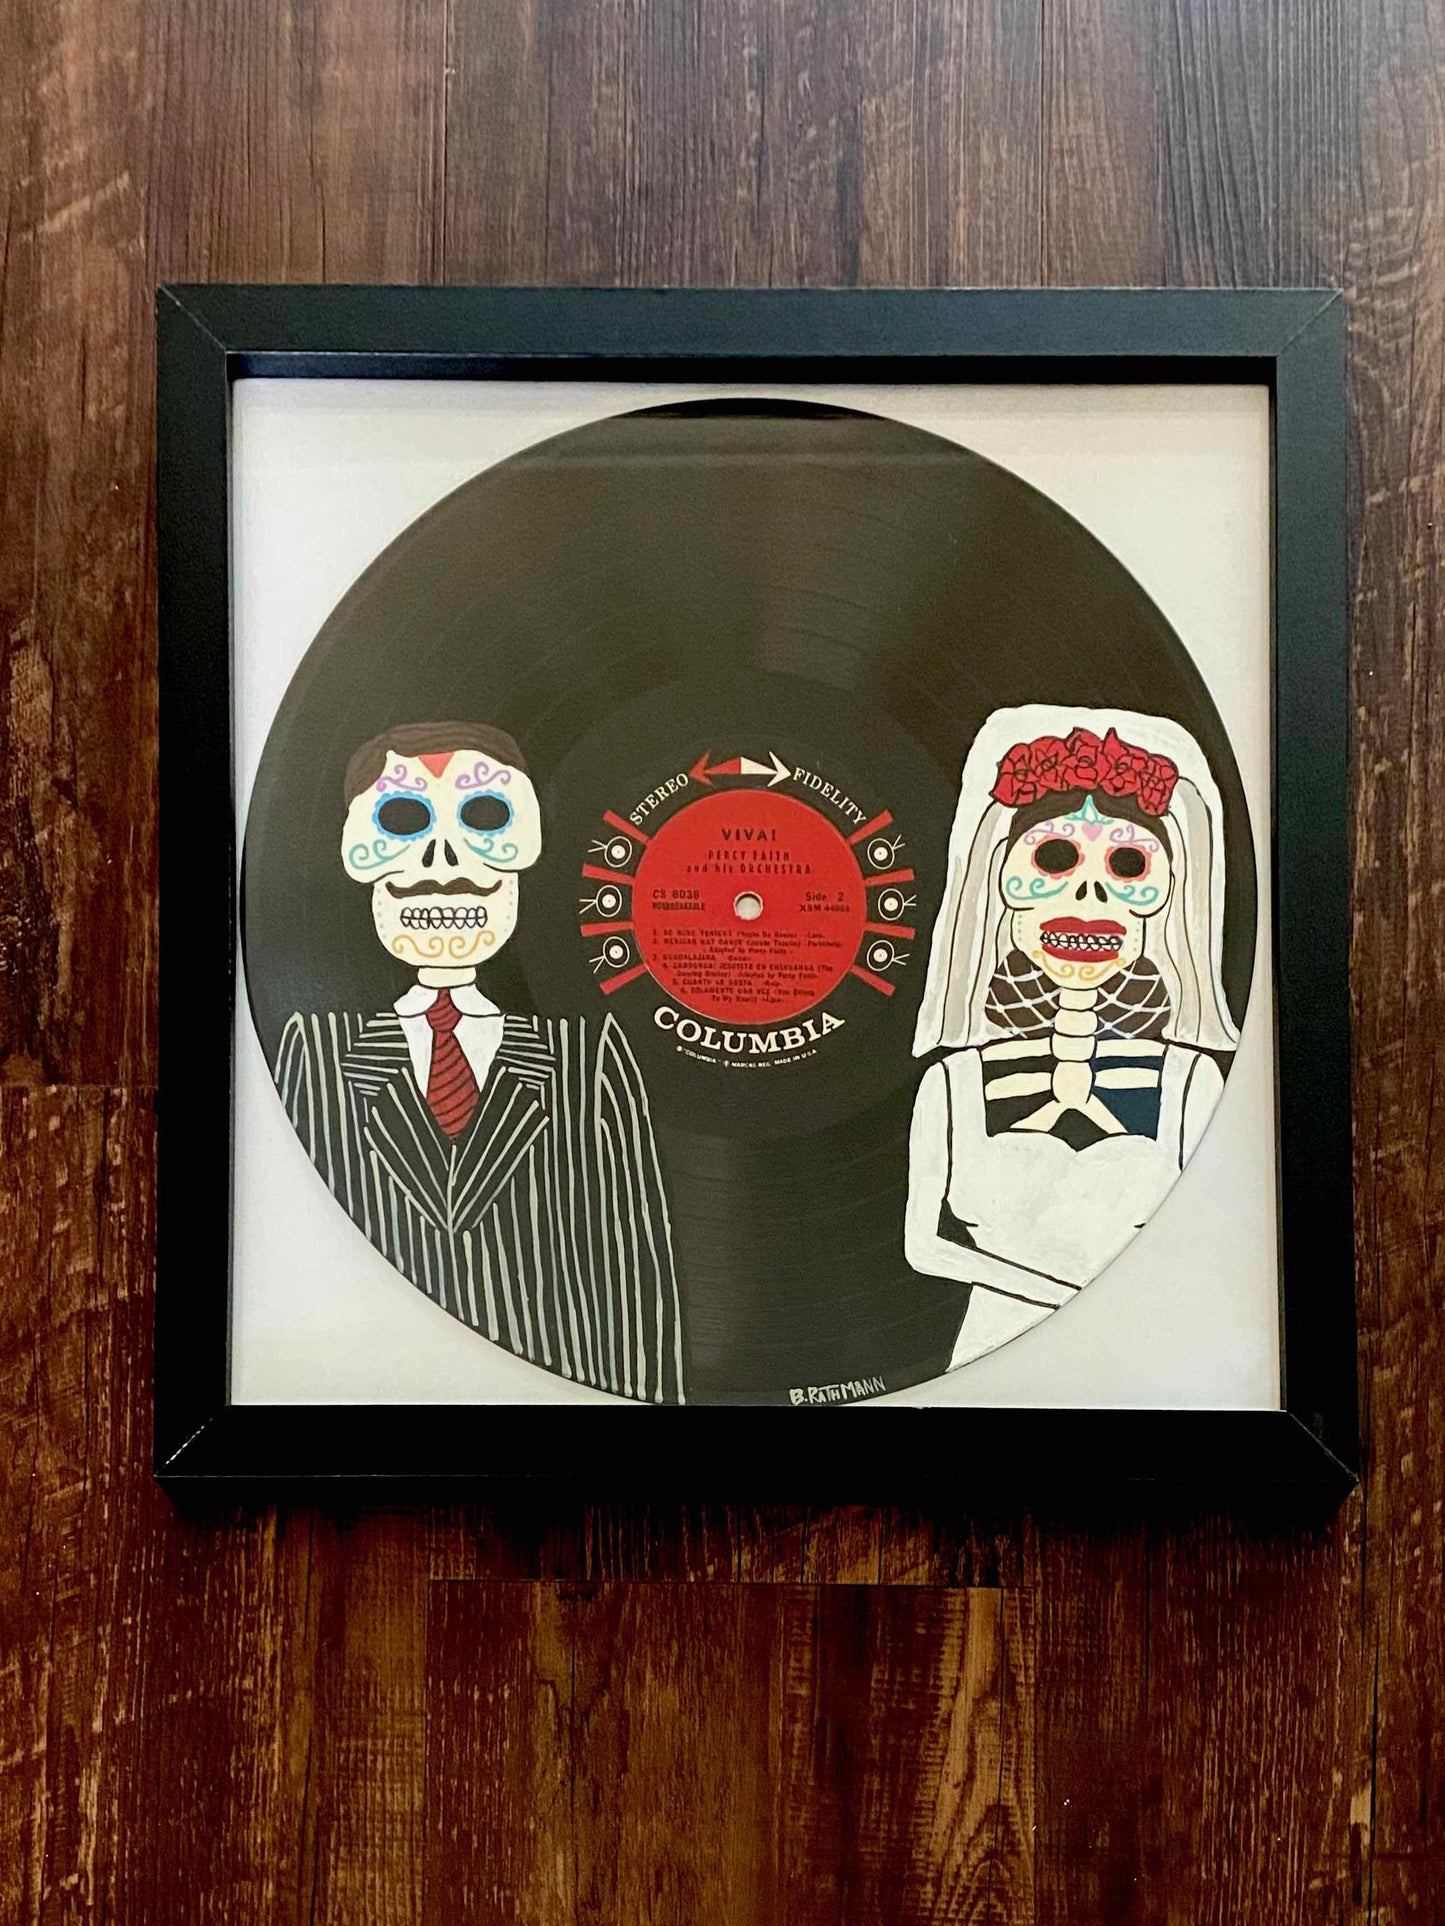 Viva Record is an acrylic painting of a traditional Dia de los Muertos couple to honor the cultural traditions of Mexico.